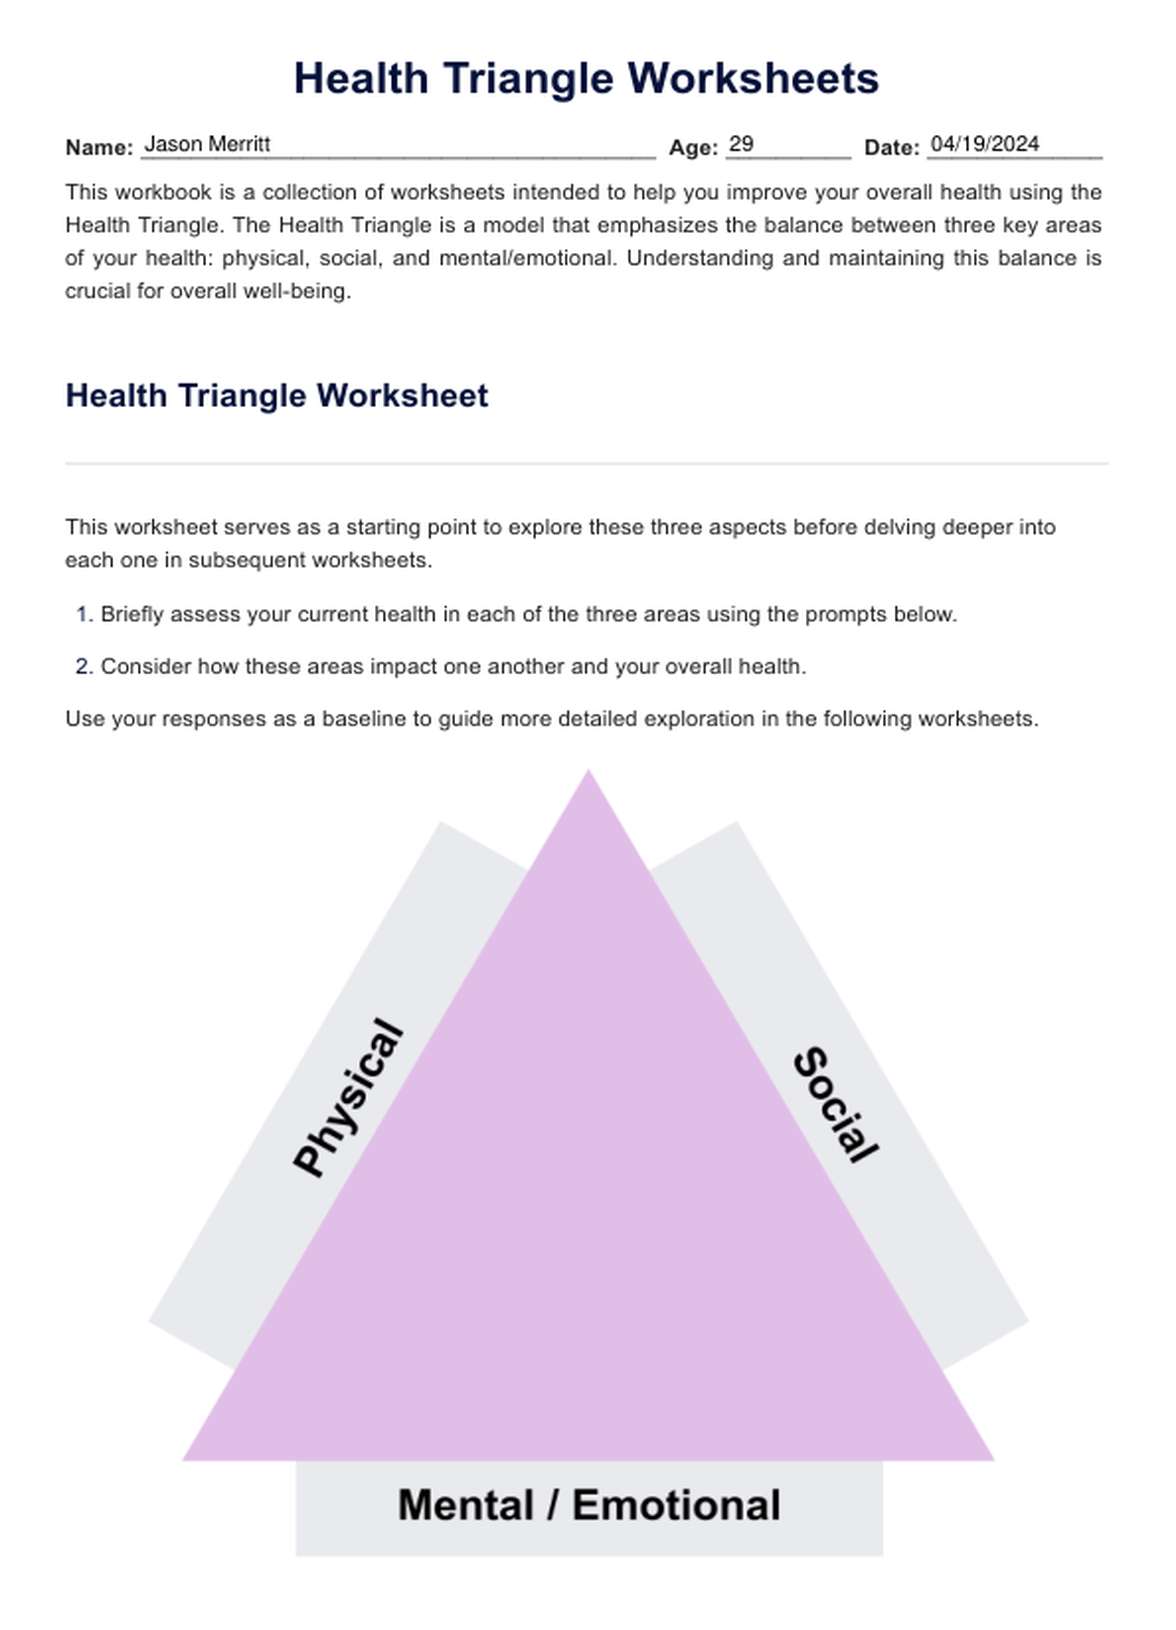 Health Triangle Worksheets PDF Example